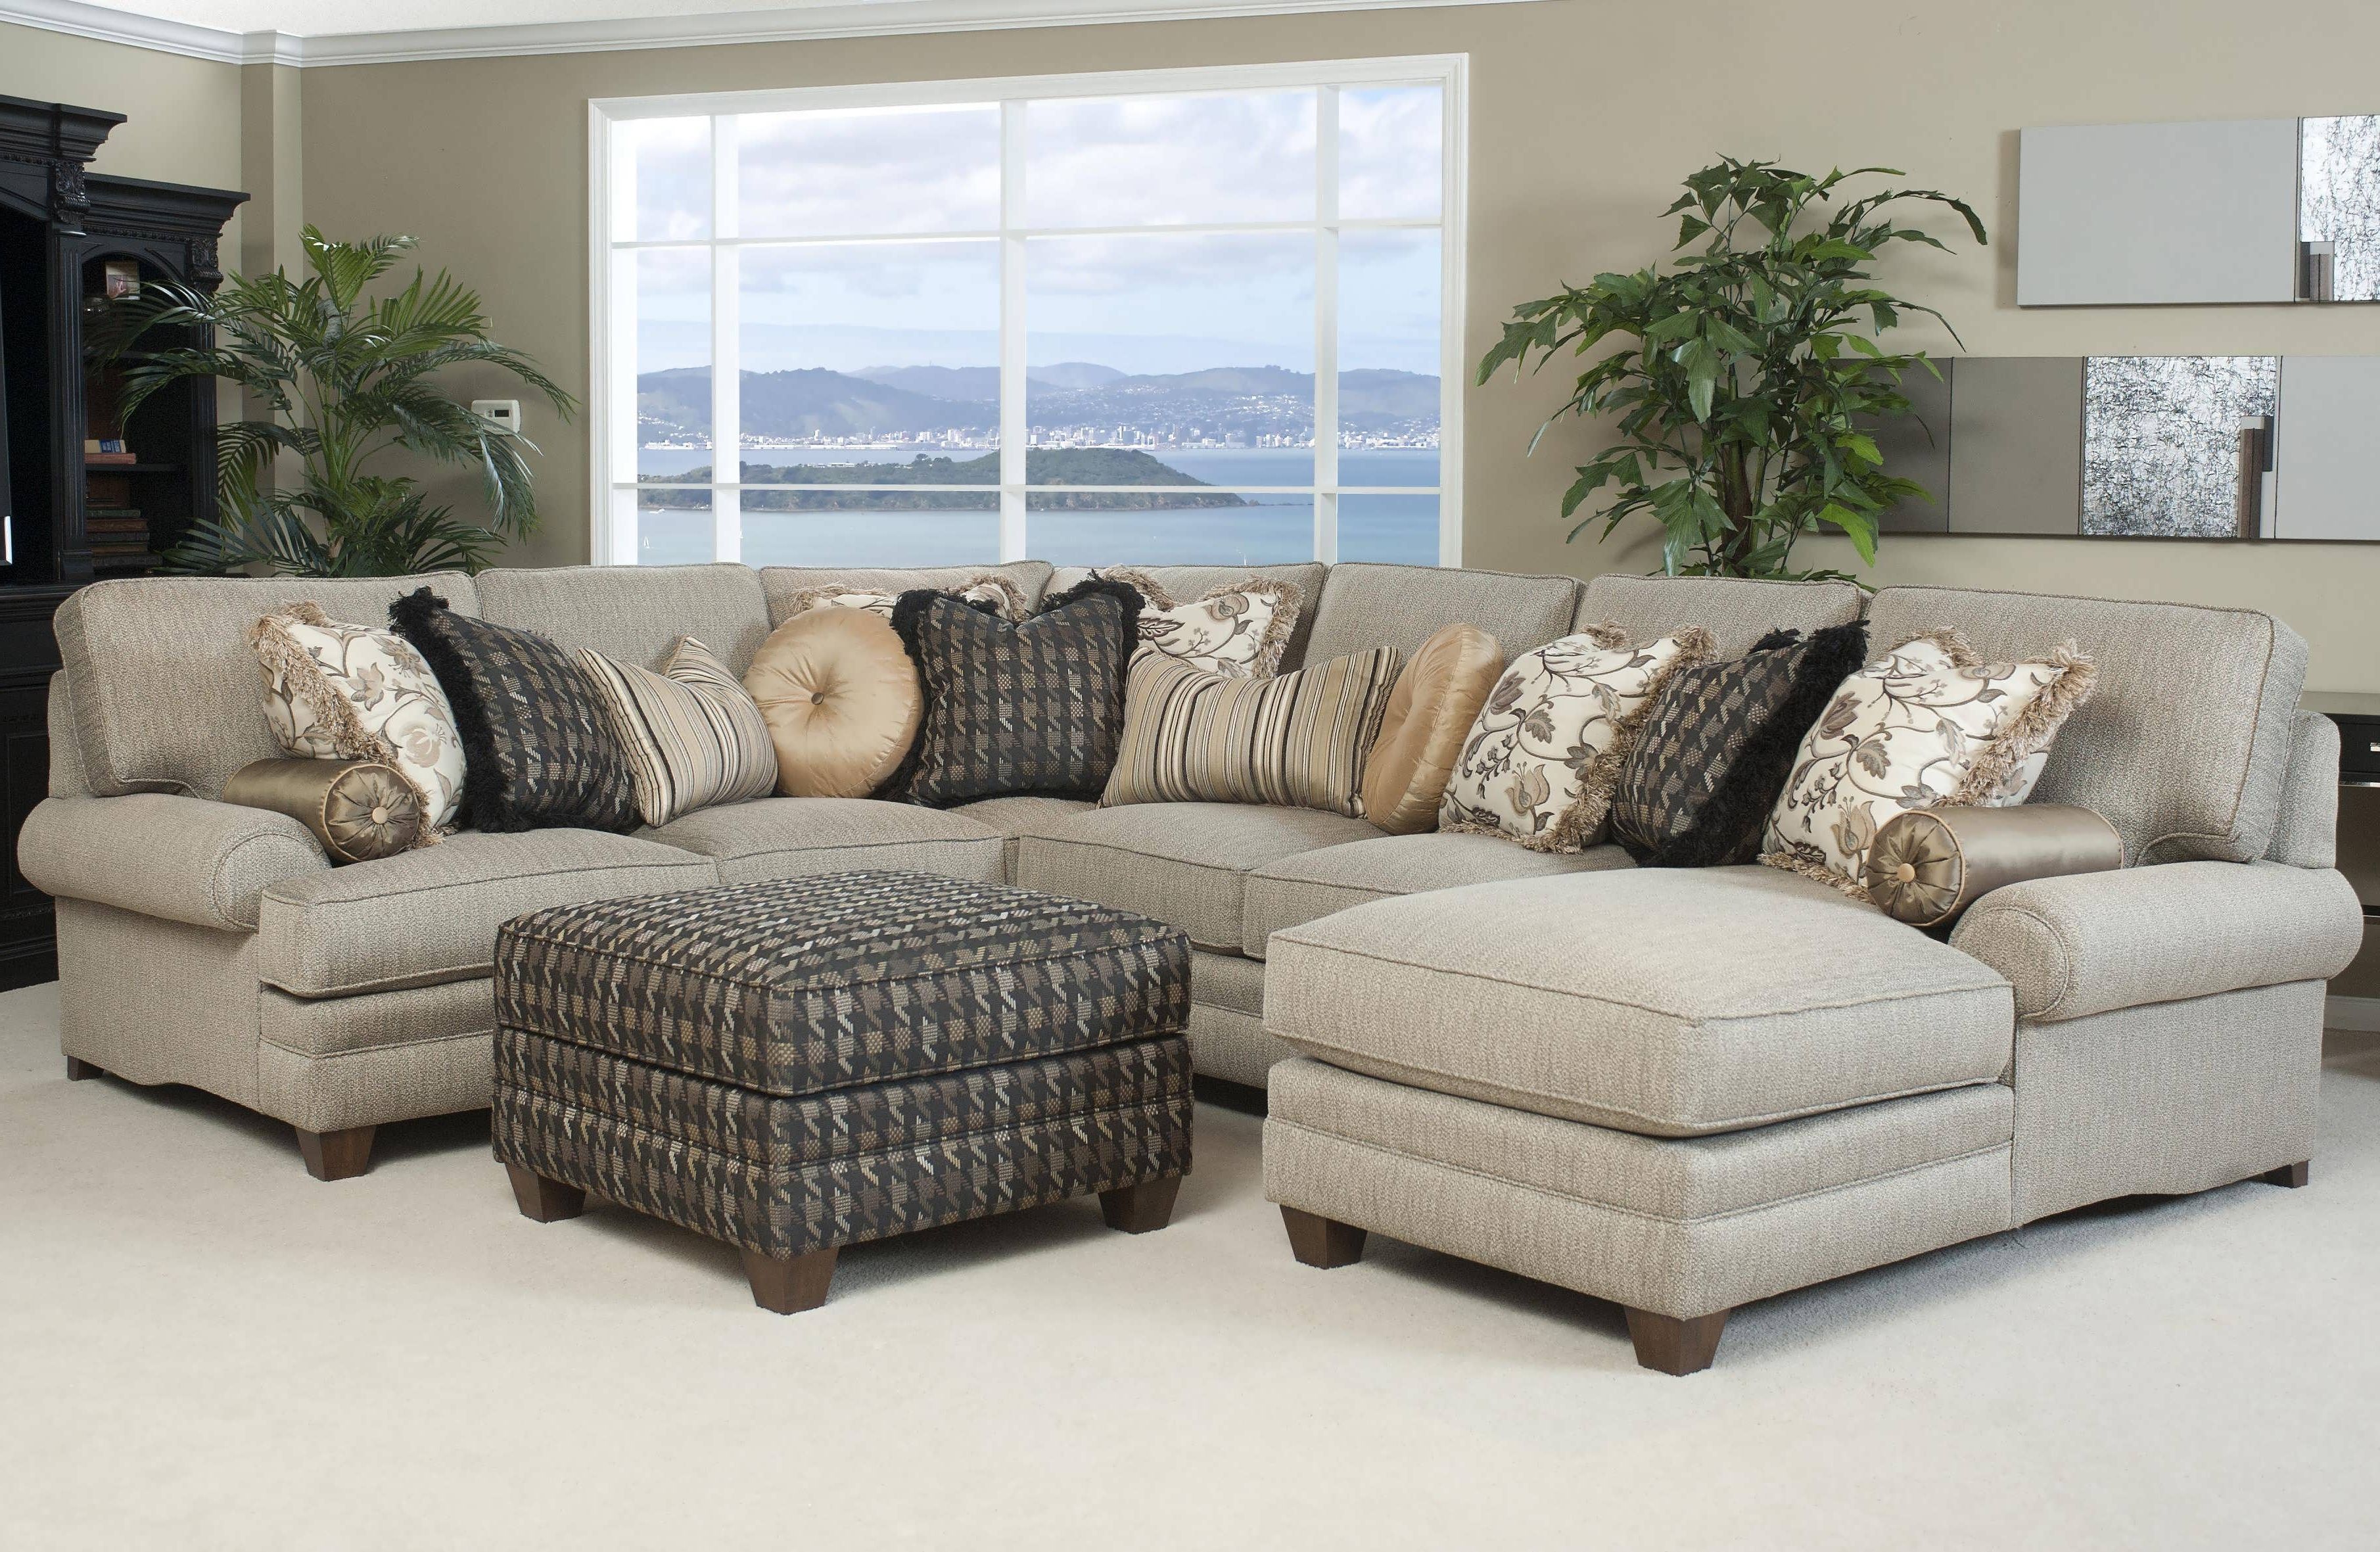 2018 Sofa : Couches L Sofa Microfiber Sectional White Sectional Small Intended For Chaise Lounge Sectionals (View 15 of 15)